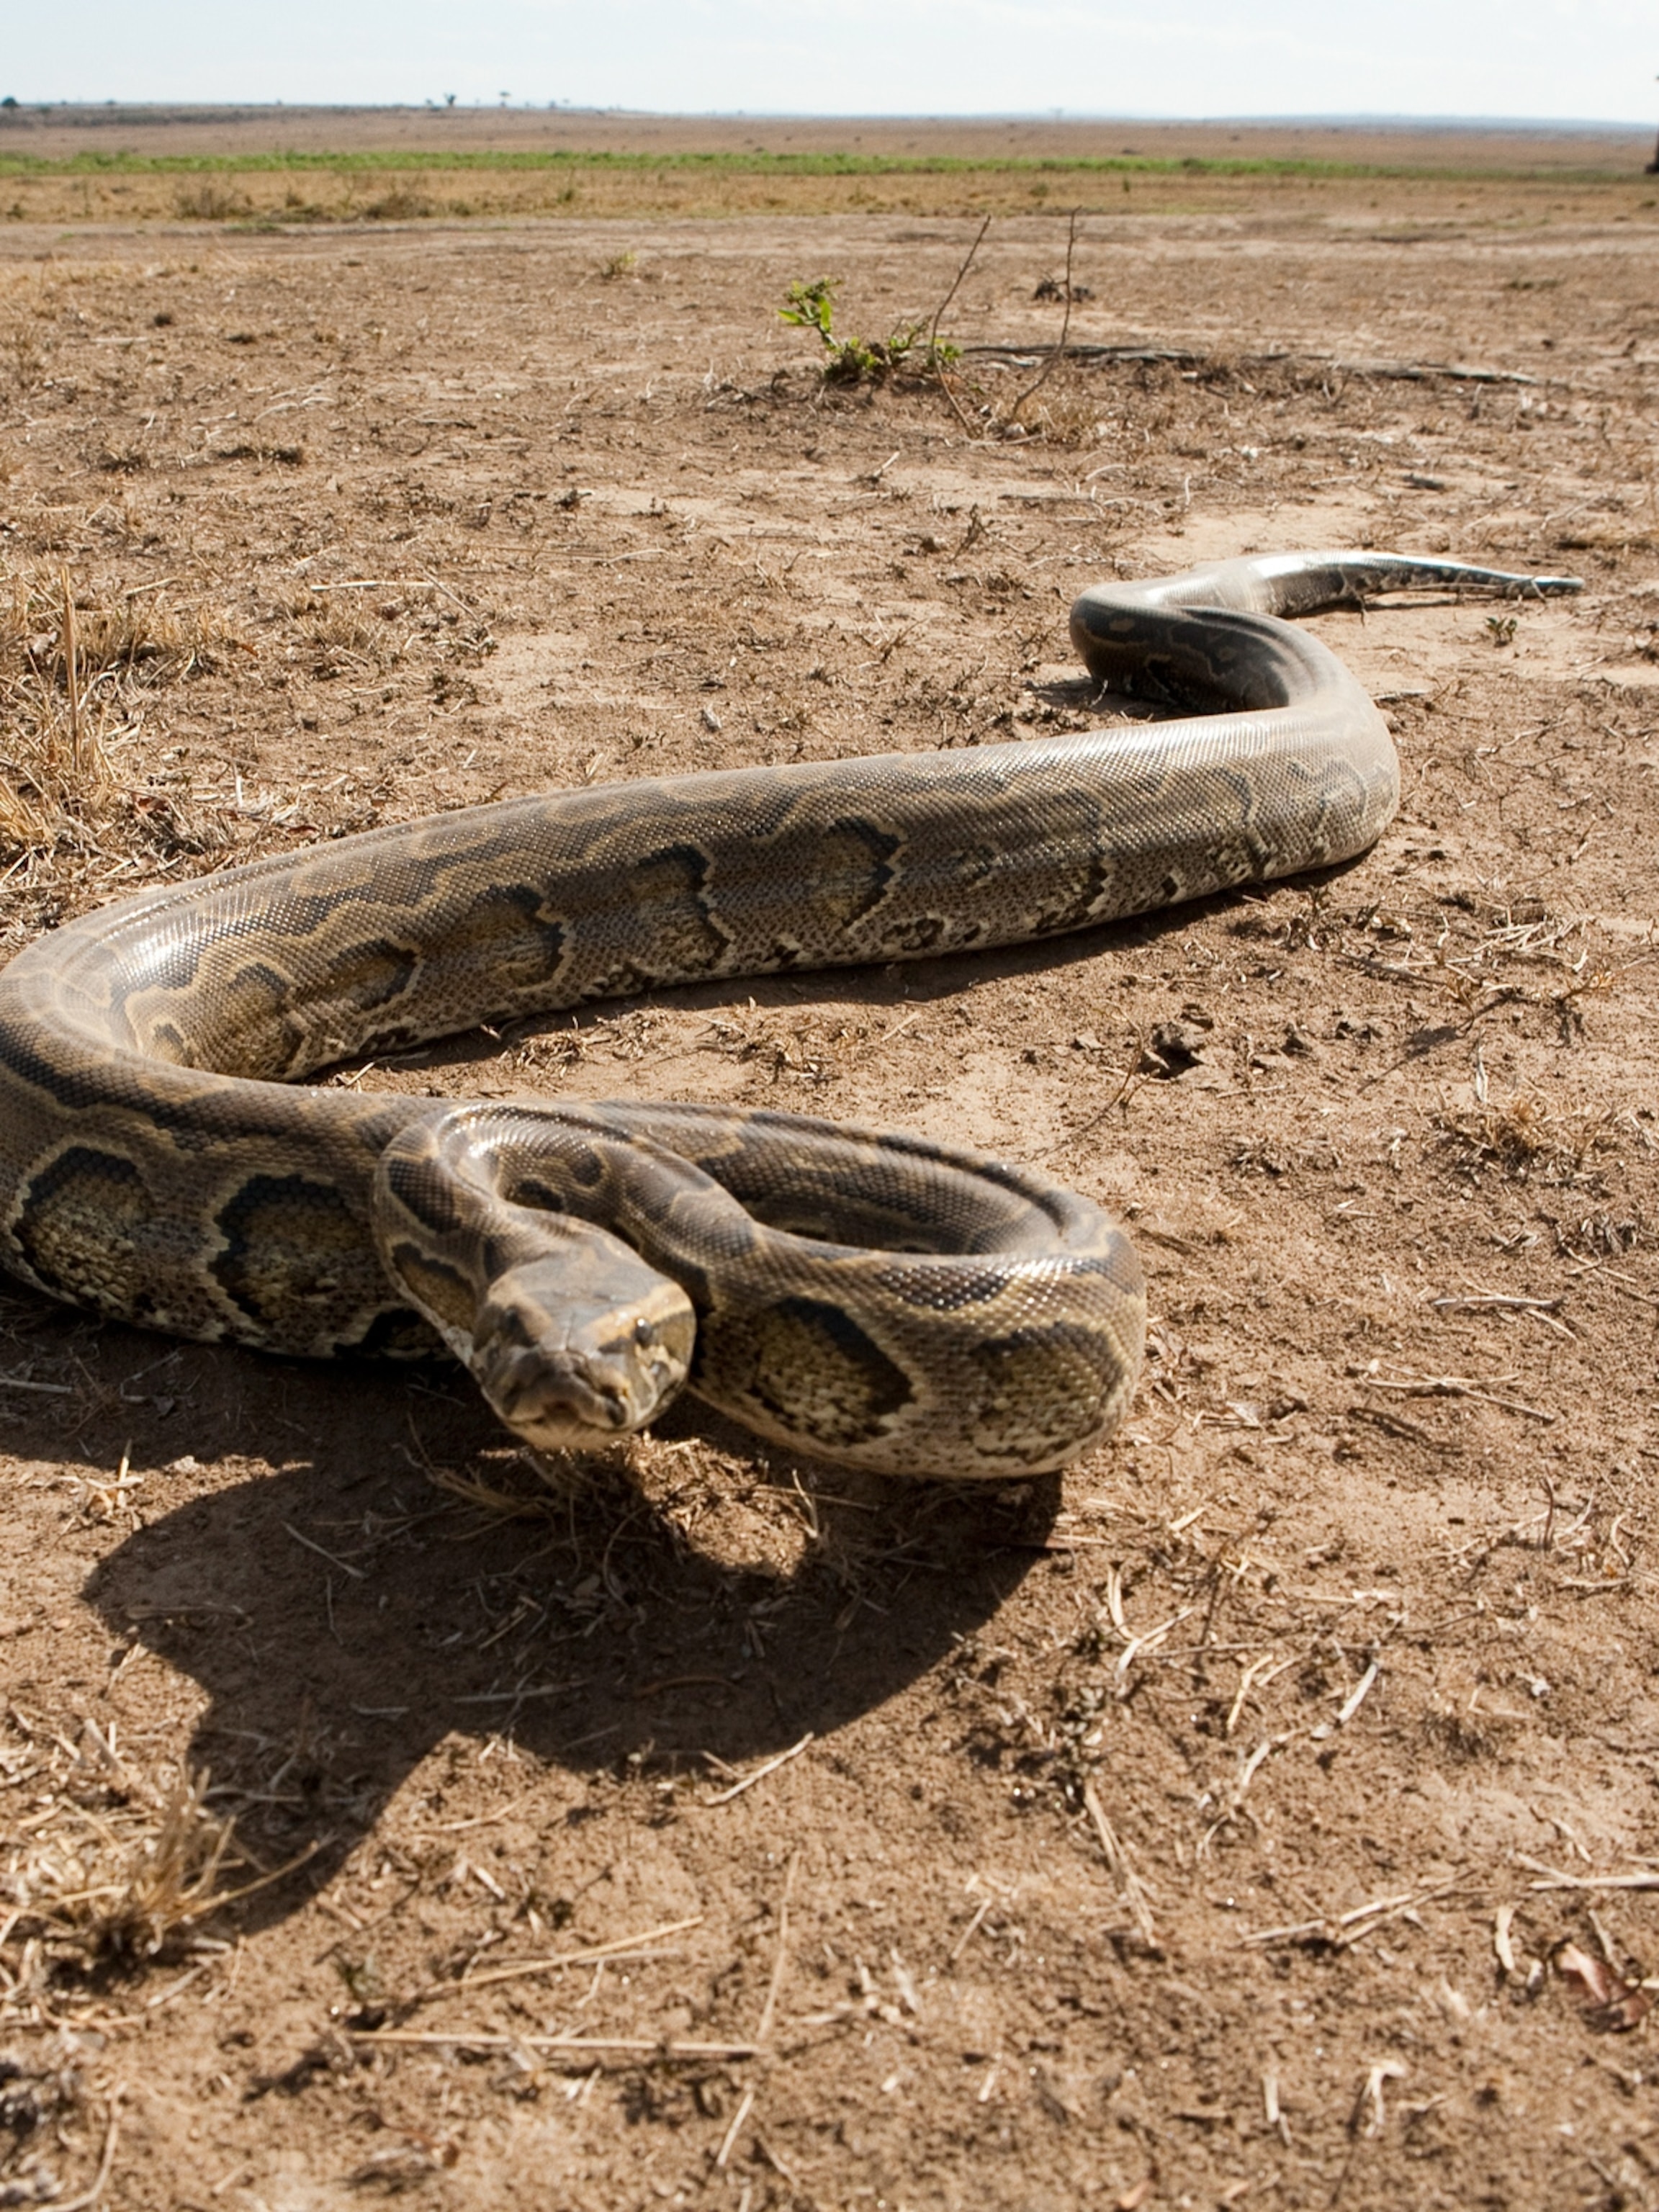 Can African rock pythons eat humans?